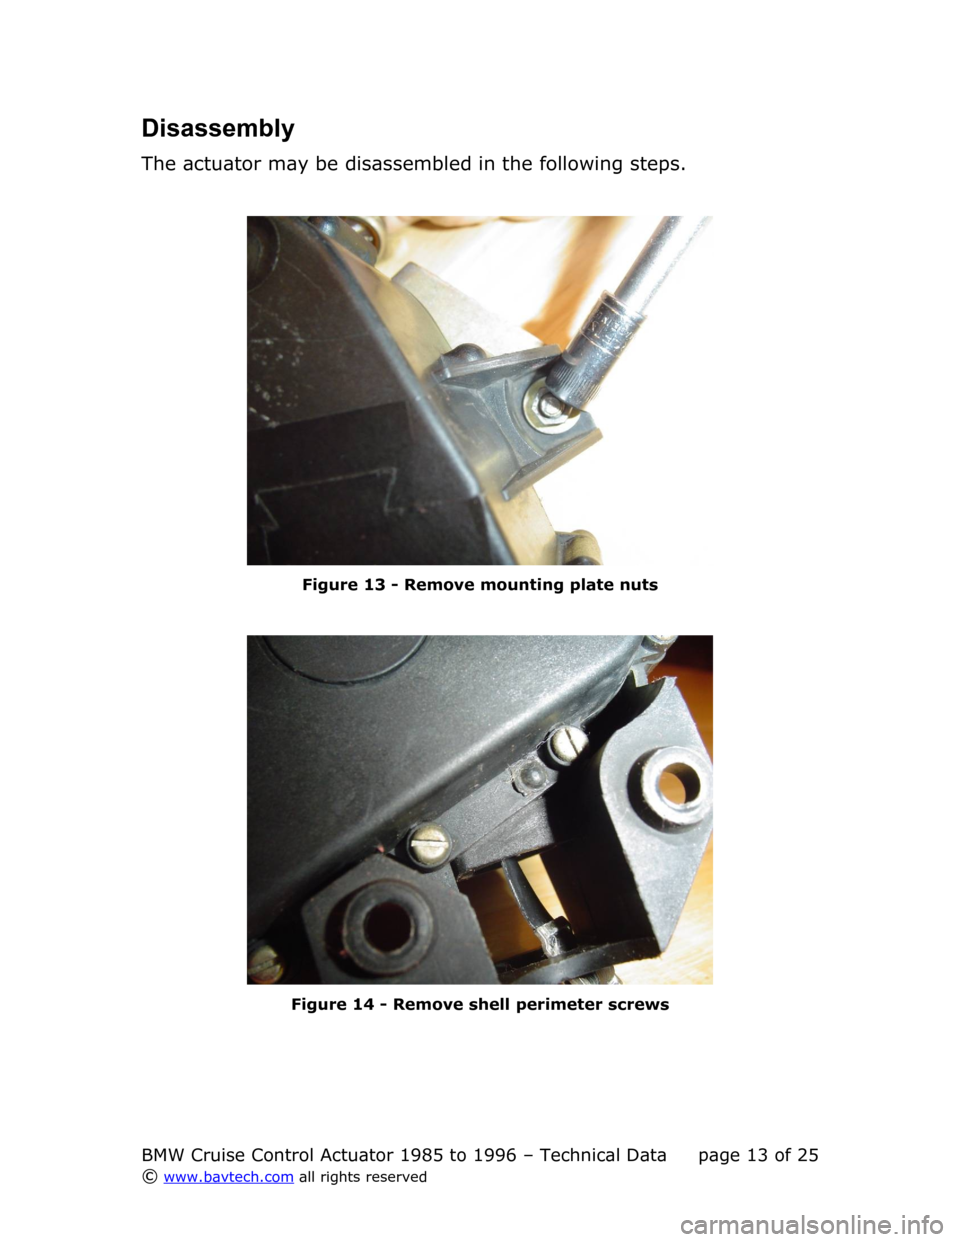 BMW 3 SERIES 1989 E36 Cruise Control Acutator Technical Data User Guide Disassembly
The actuator may be disassembled in the following steps.
Figure  13  - Remove mounting plate nuts
Figure  14  - Remove shell perimeter screws
BMW Cruise Control Actuator 1985 to 1996 – T